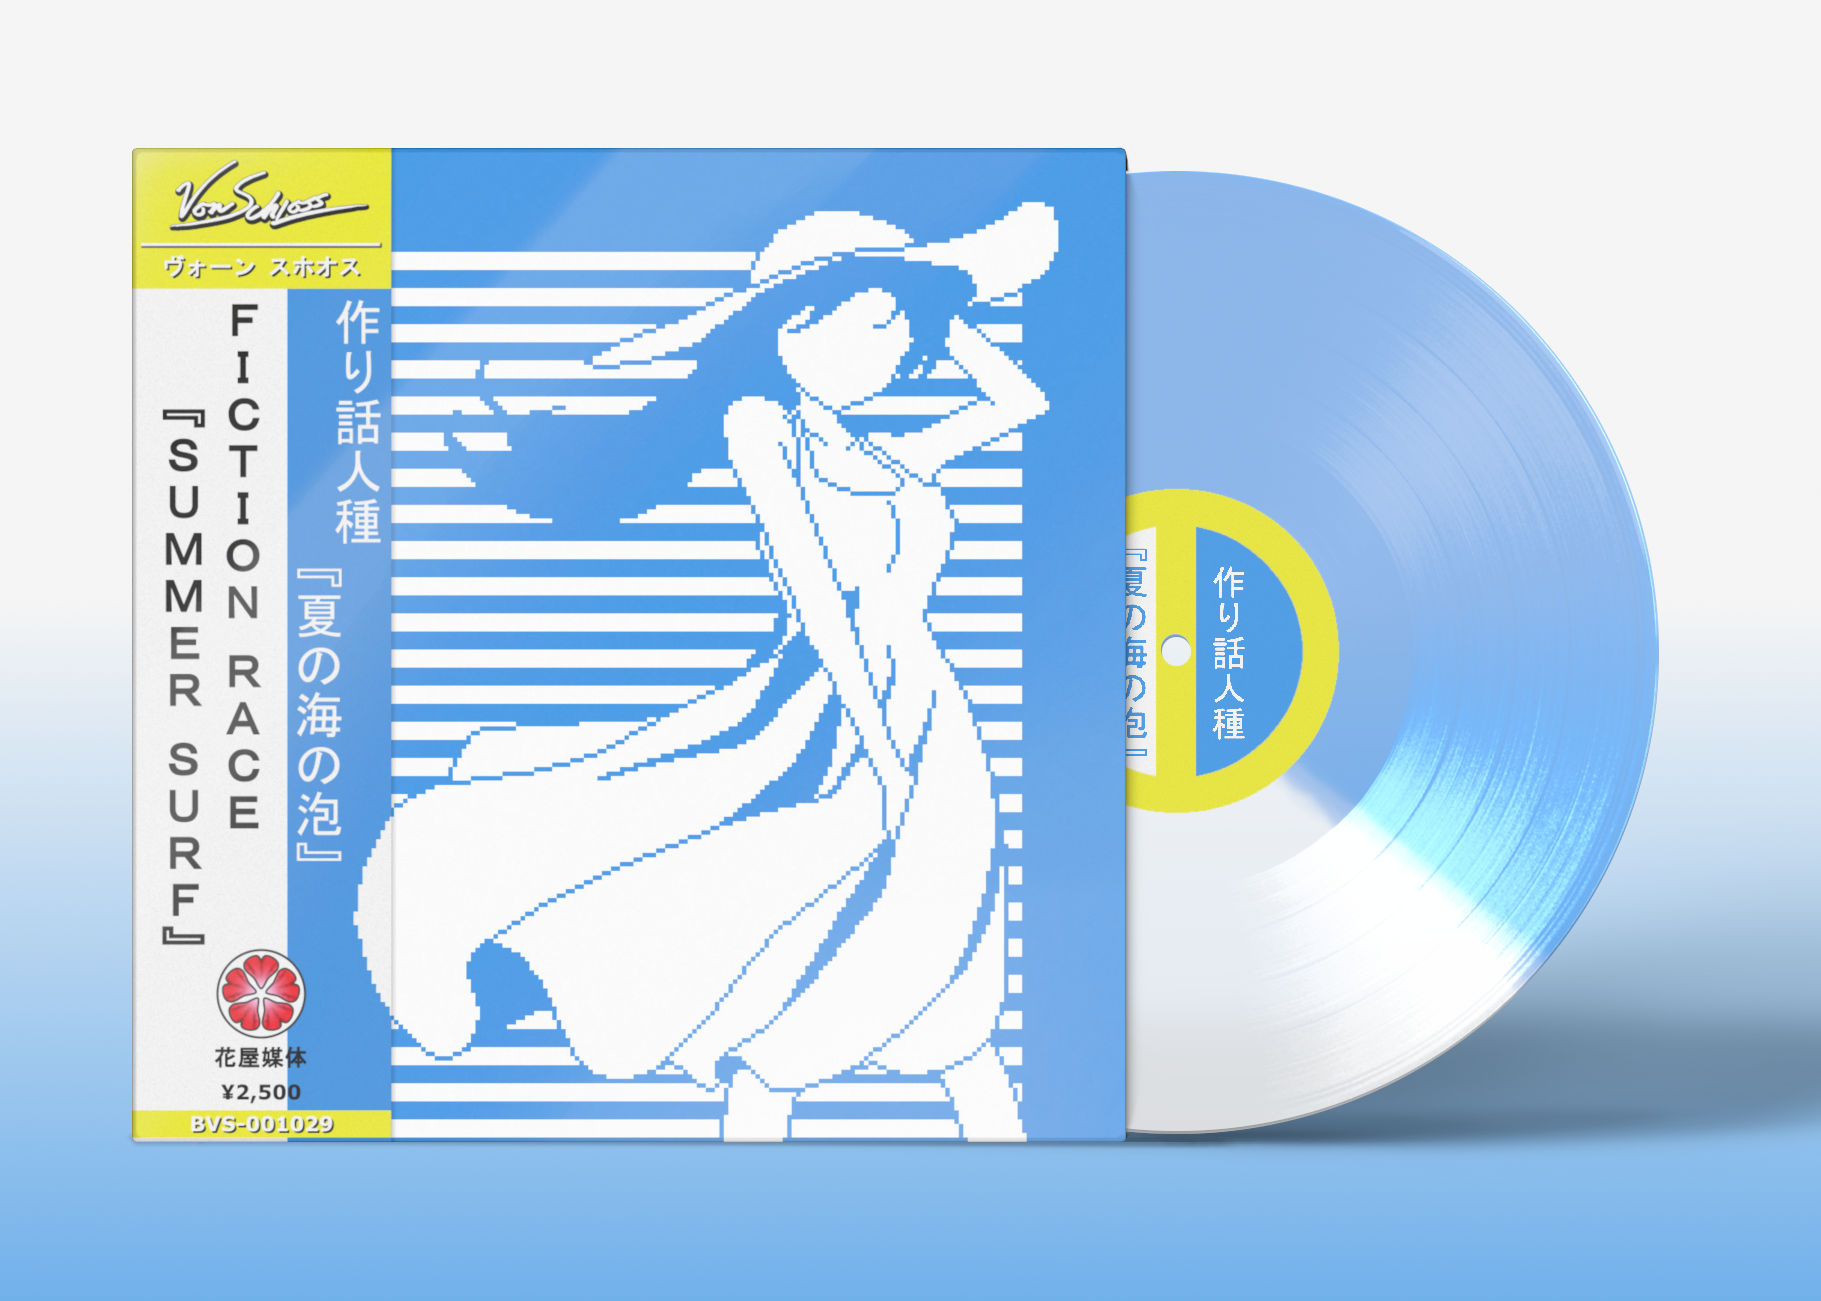 Anime CD/music album art in vaporwave design. Features pixelized women in white on sky blue background with OBI strip.